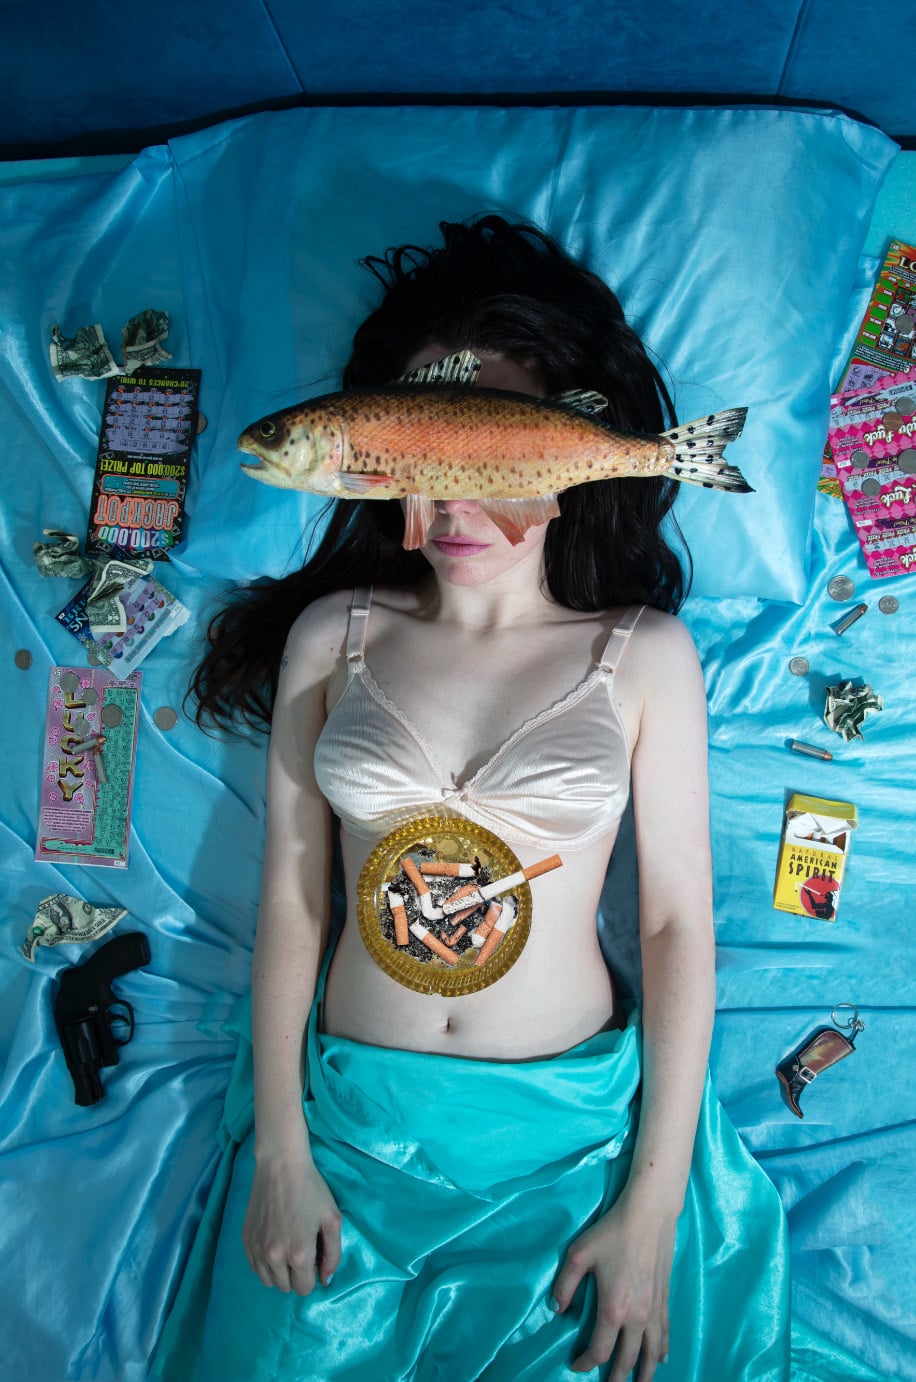 Fish out of Water, Photograph by Kat Alyst